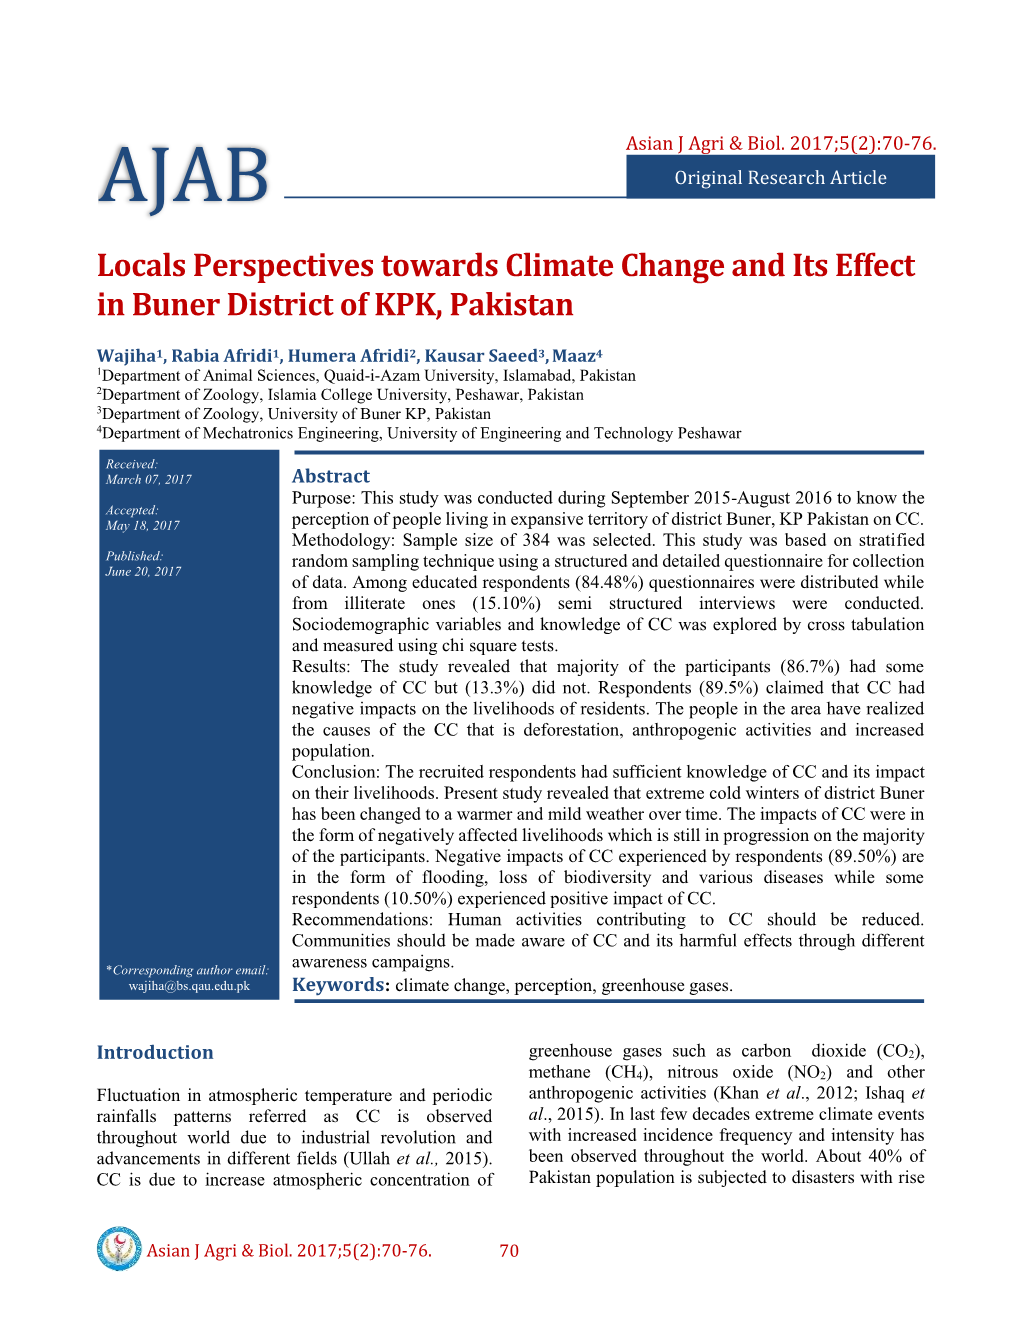 Locals Perspectives Towards Climate Change and Its Effect in Buner District of KPK, Pakistan